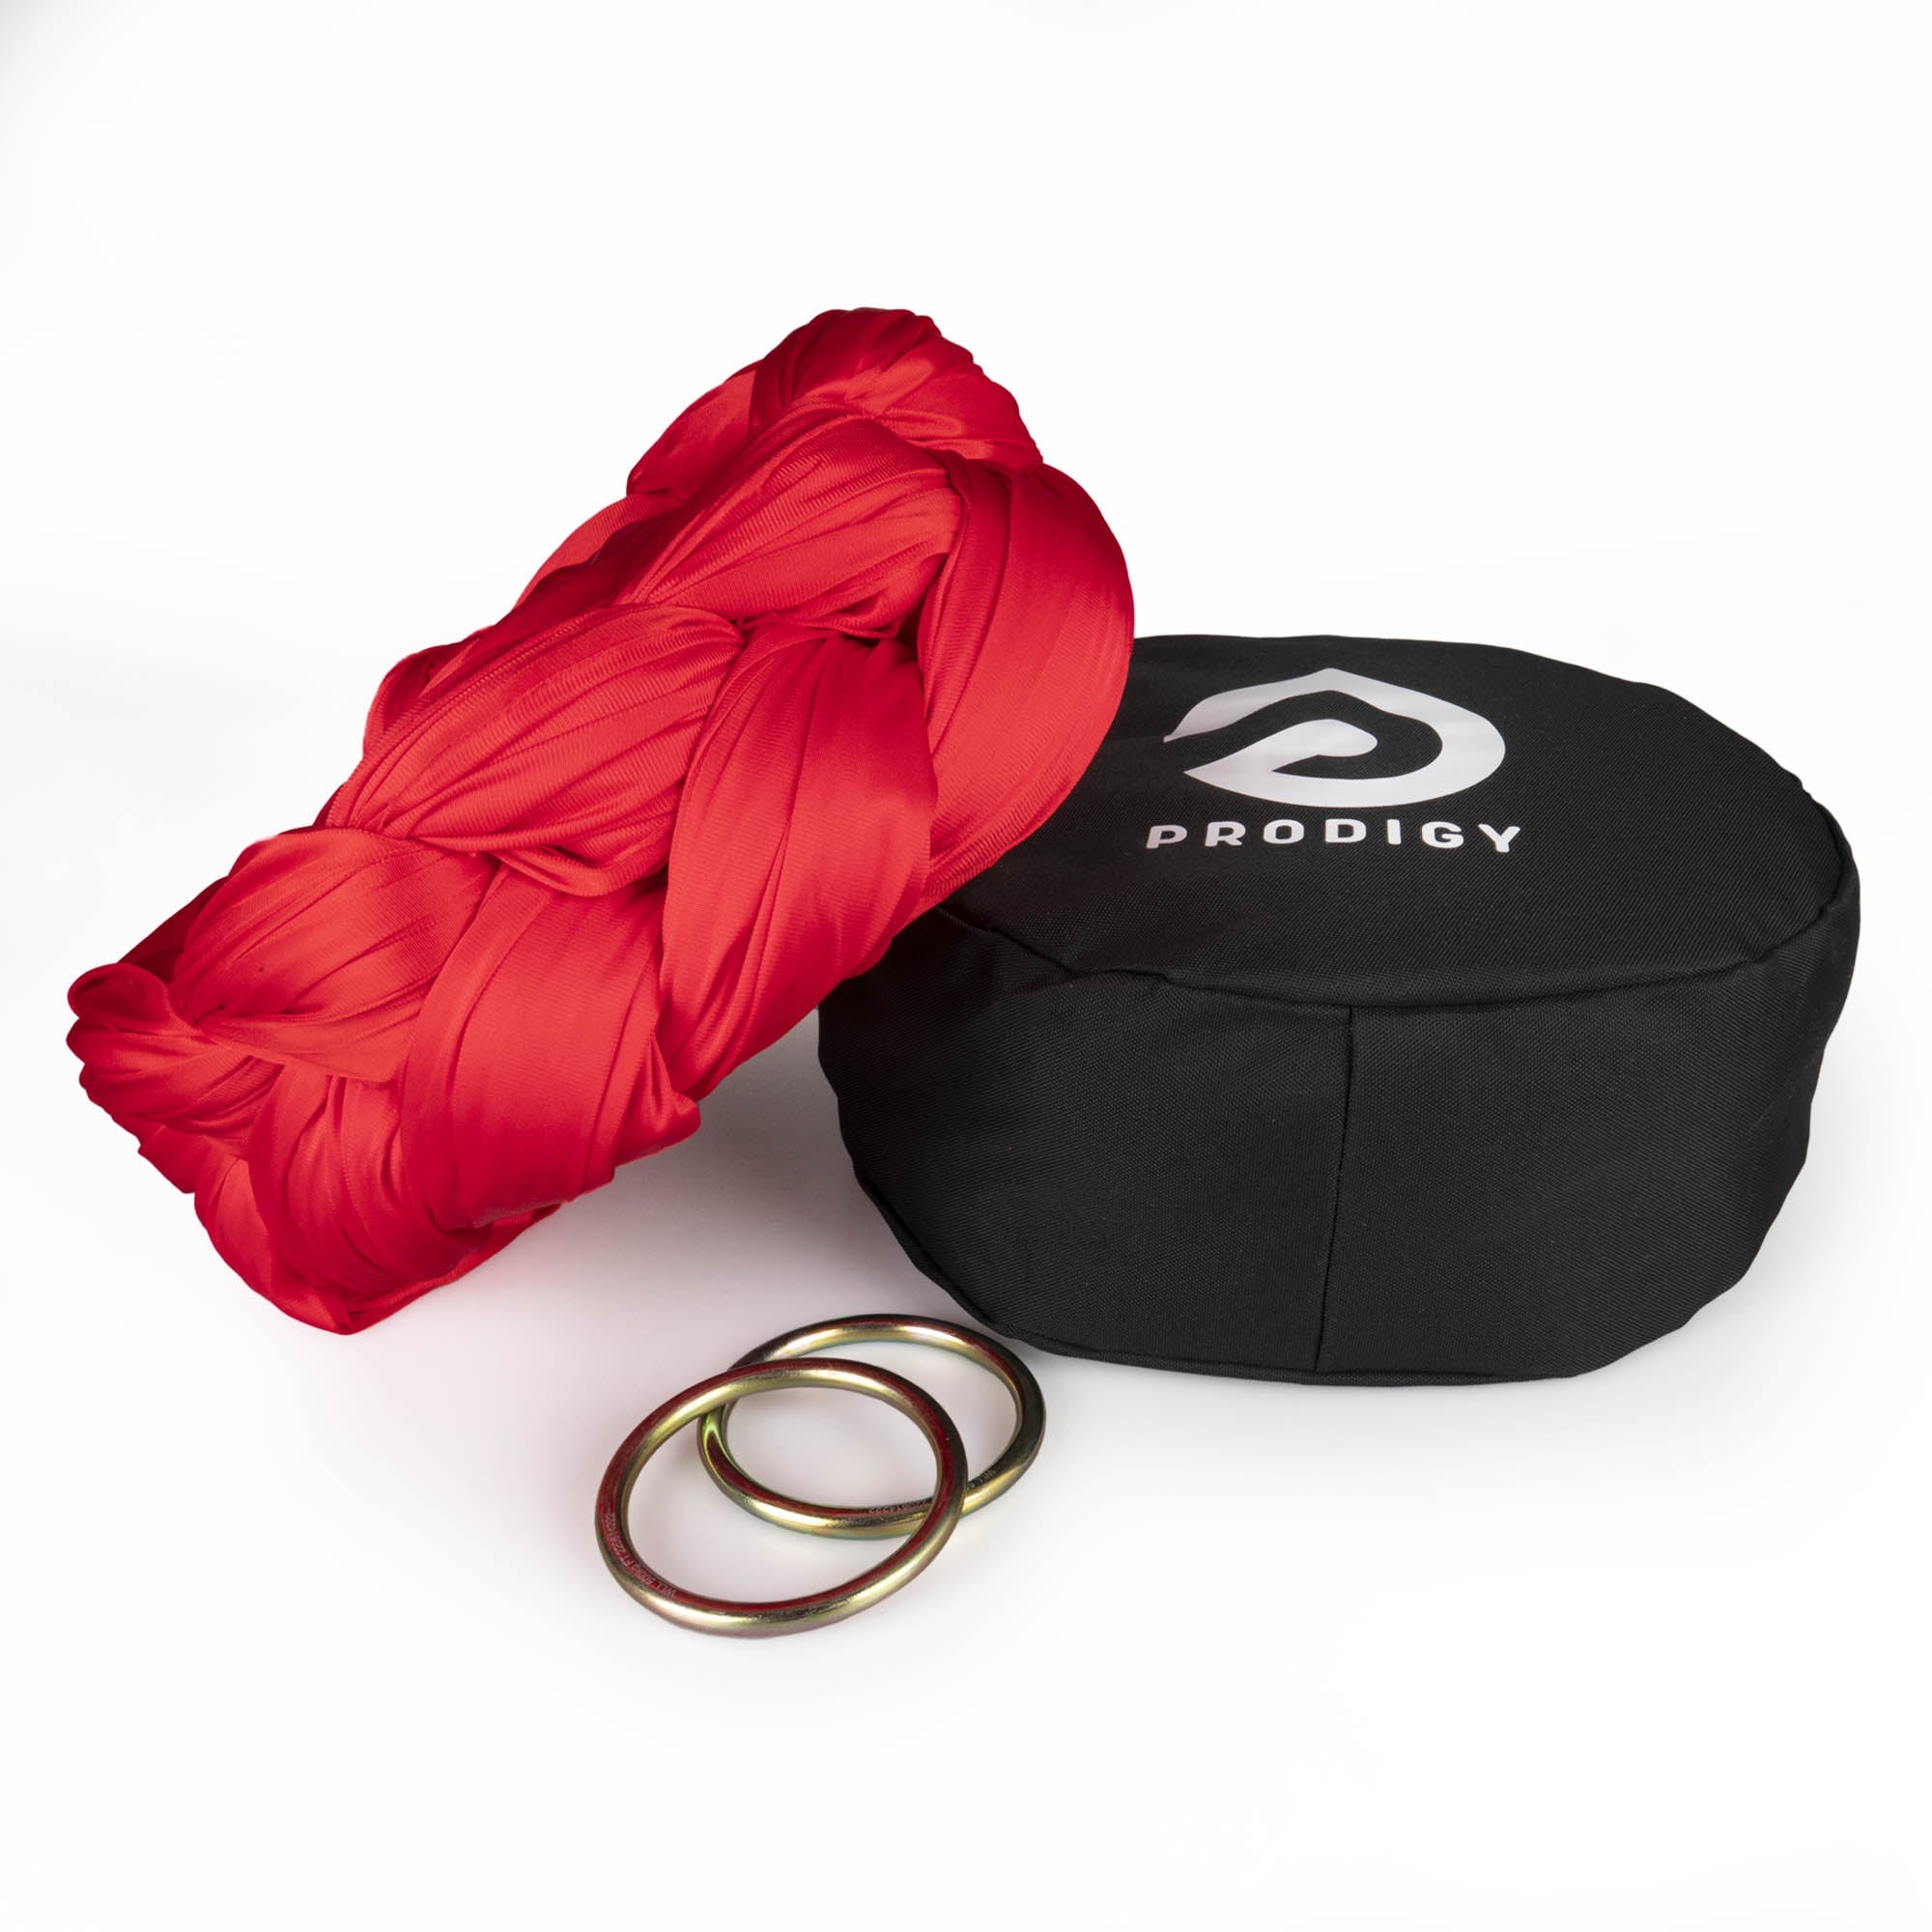 Prodigy 6m red aerial yoga hammock resting on hammock bag with the rings